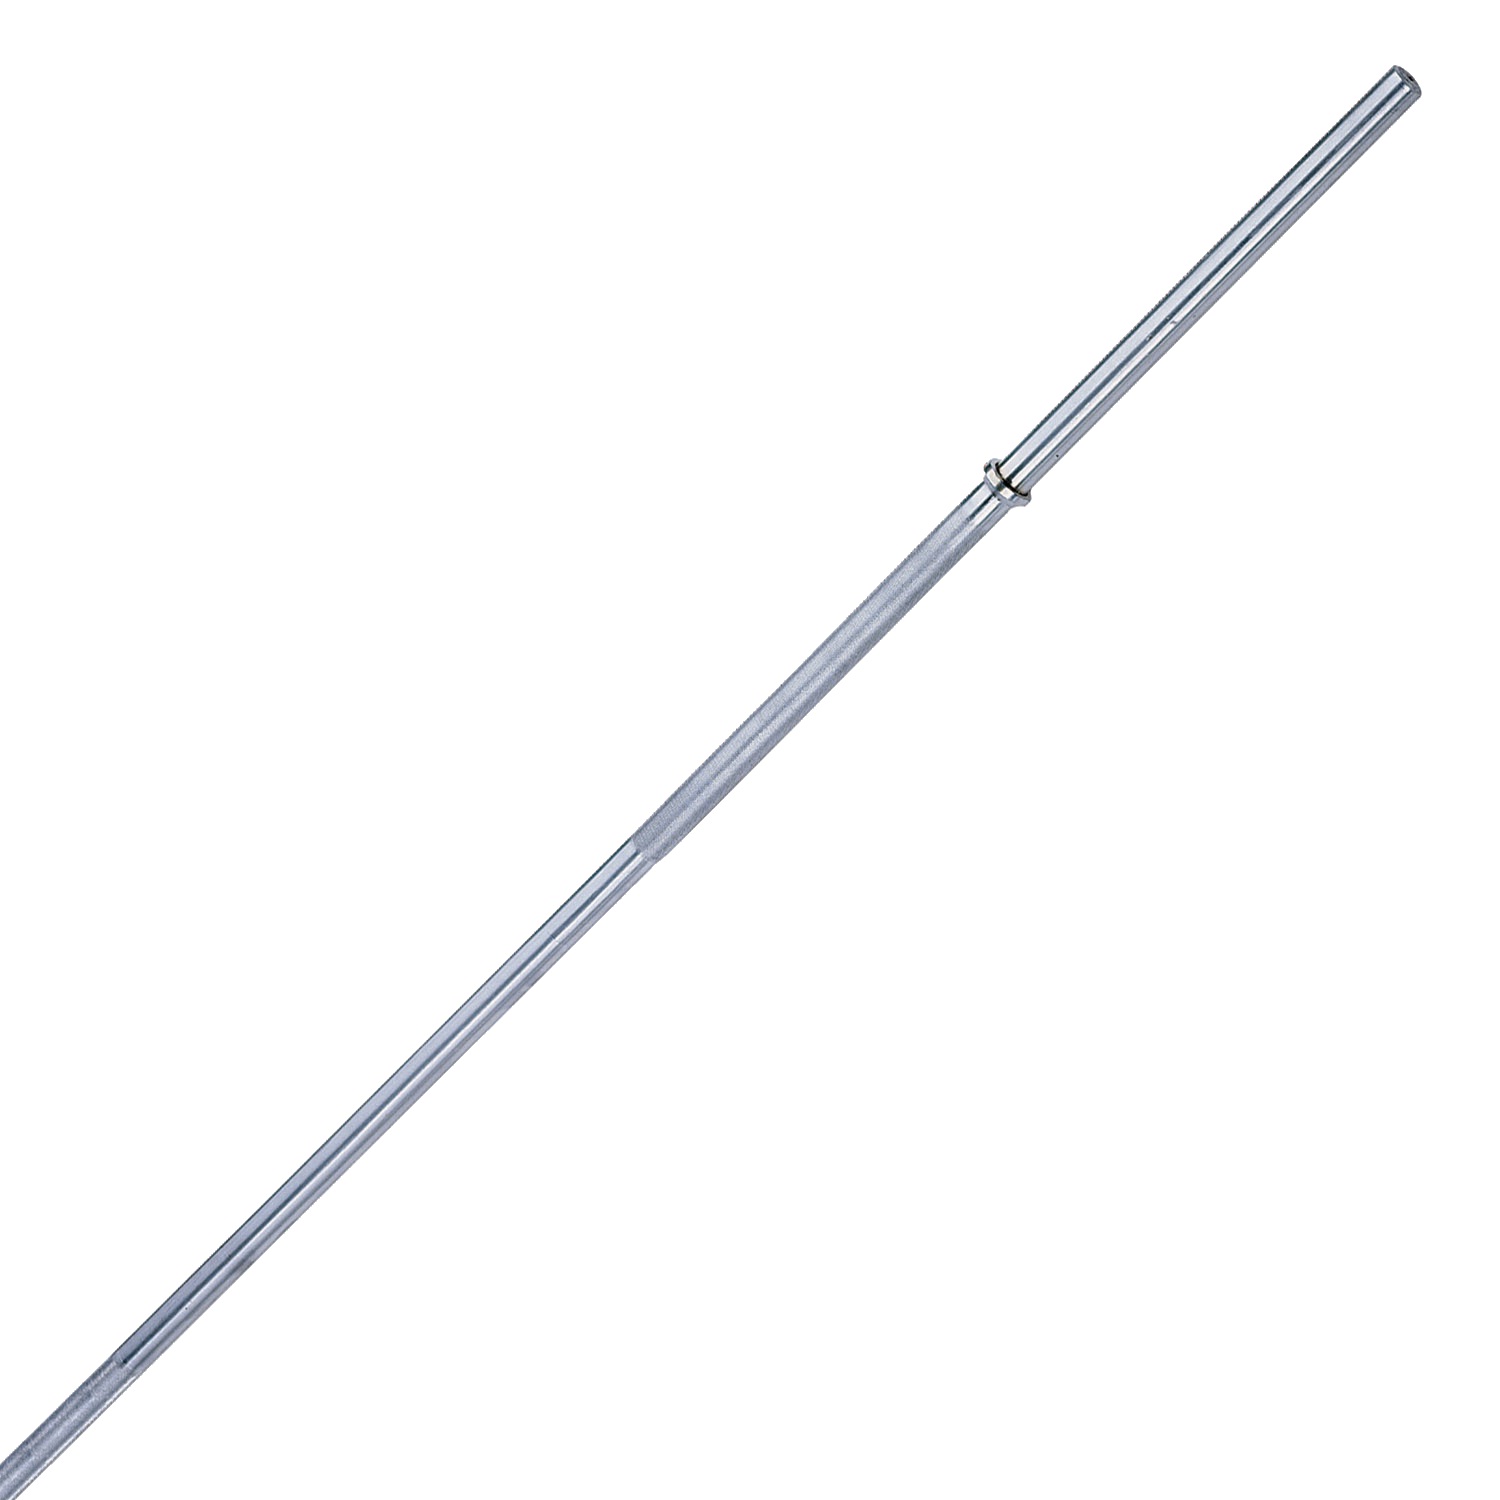 Body Solid RB72 6' Standard Free-Weight Chrome Bar - image 2 of 3